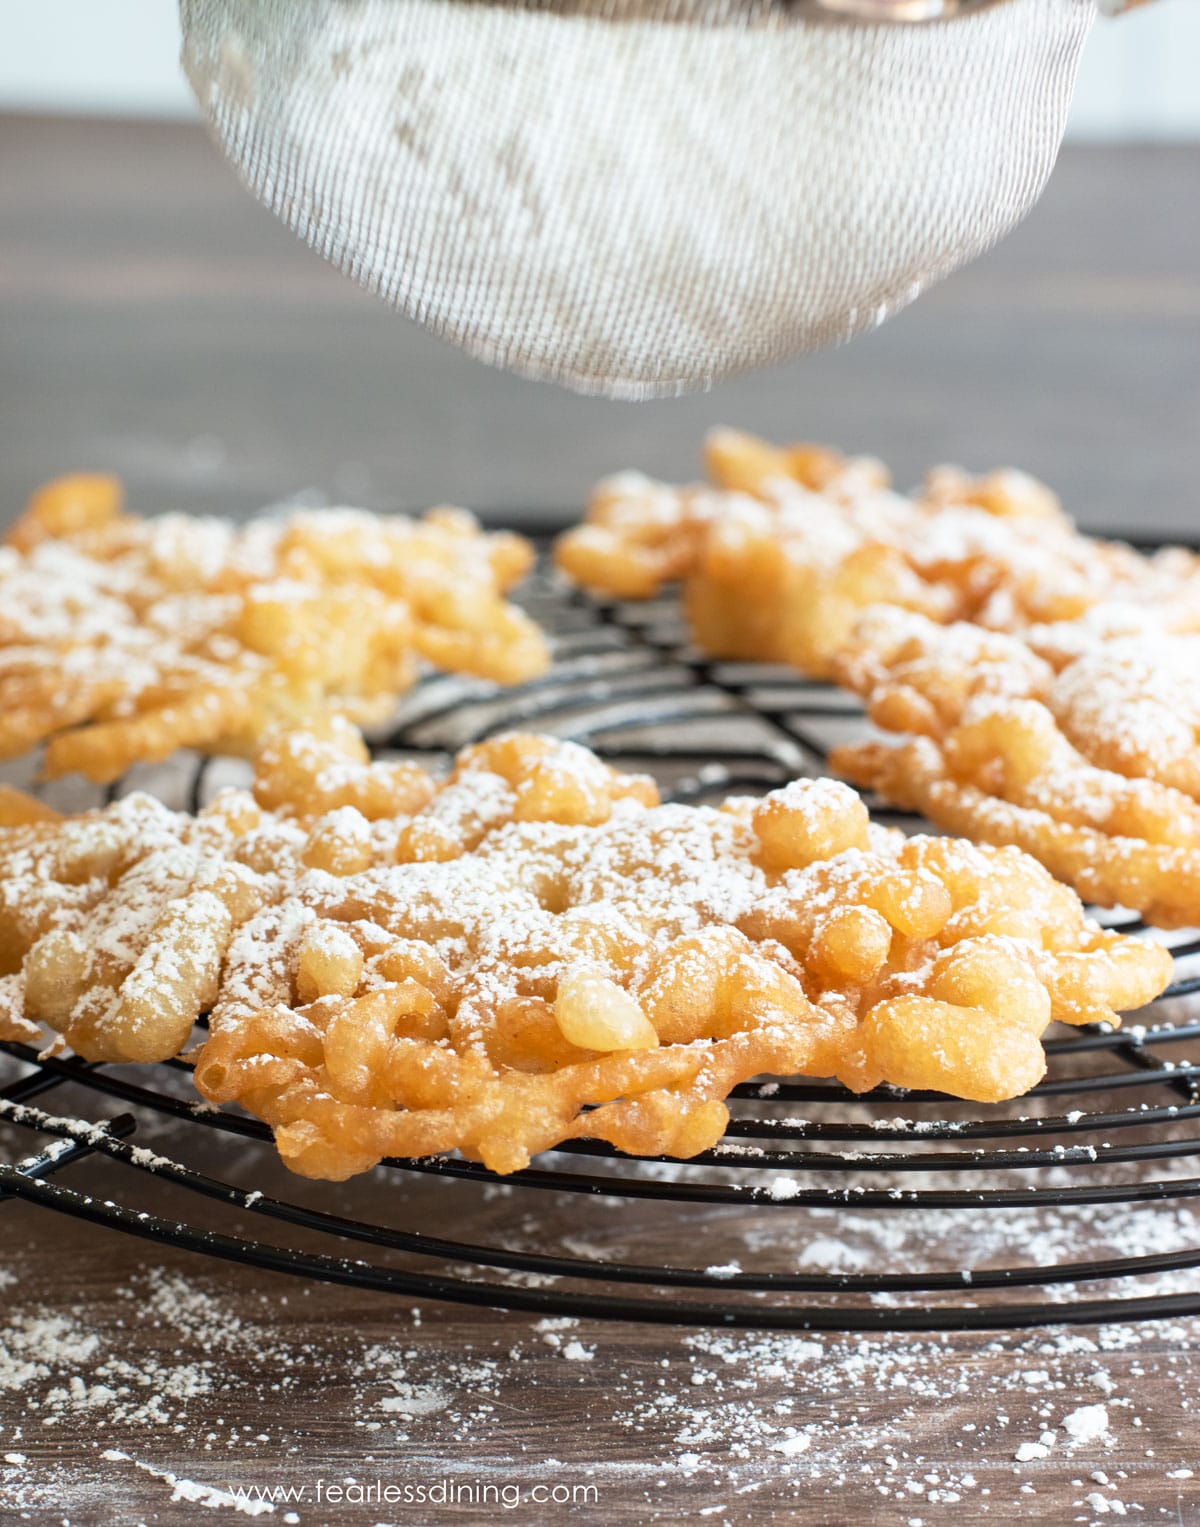 dusting a funnel cake with powdered sugar.